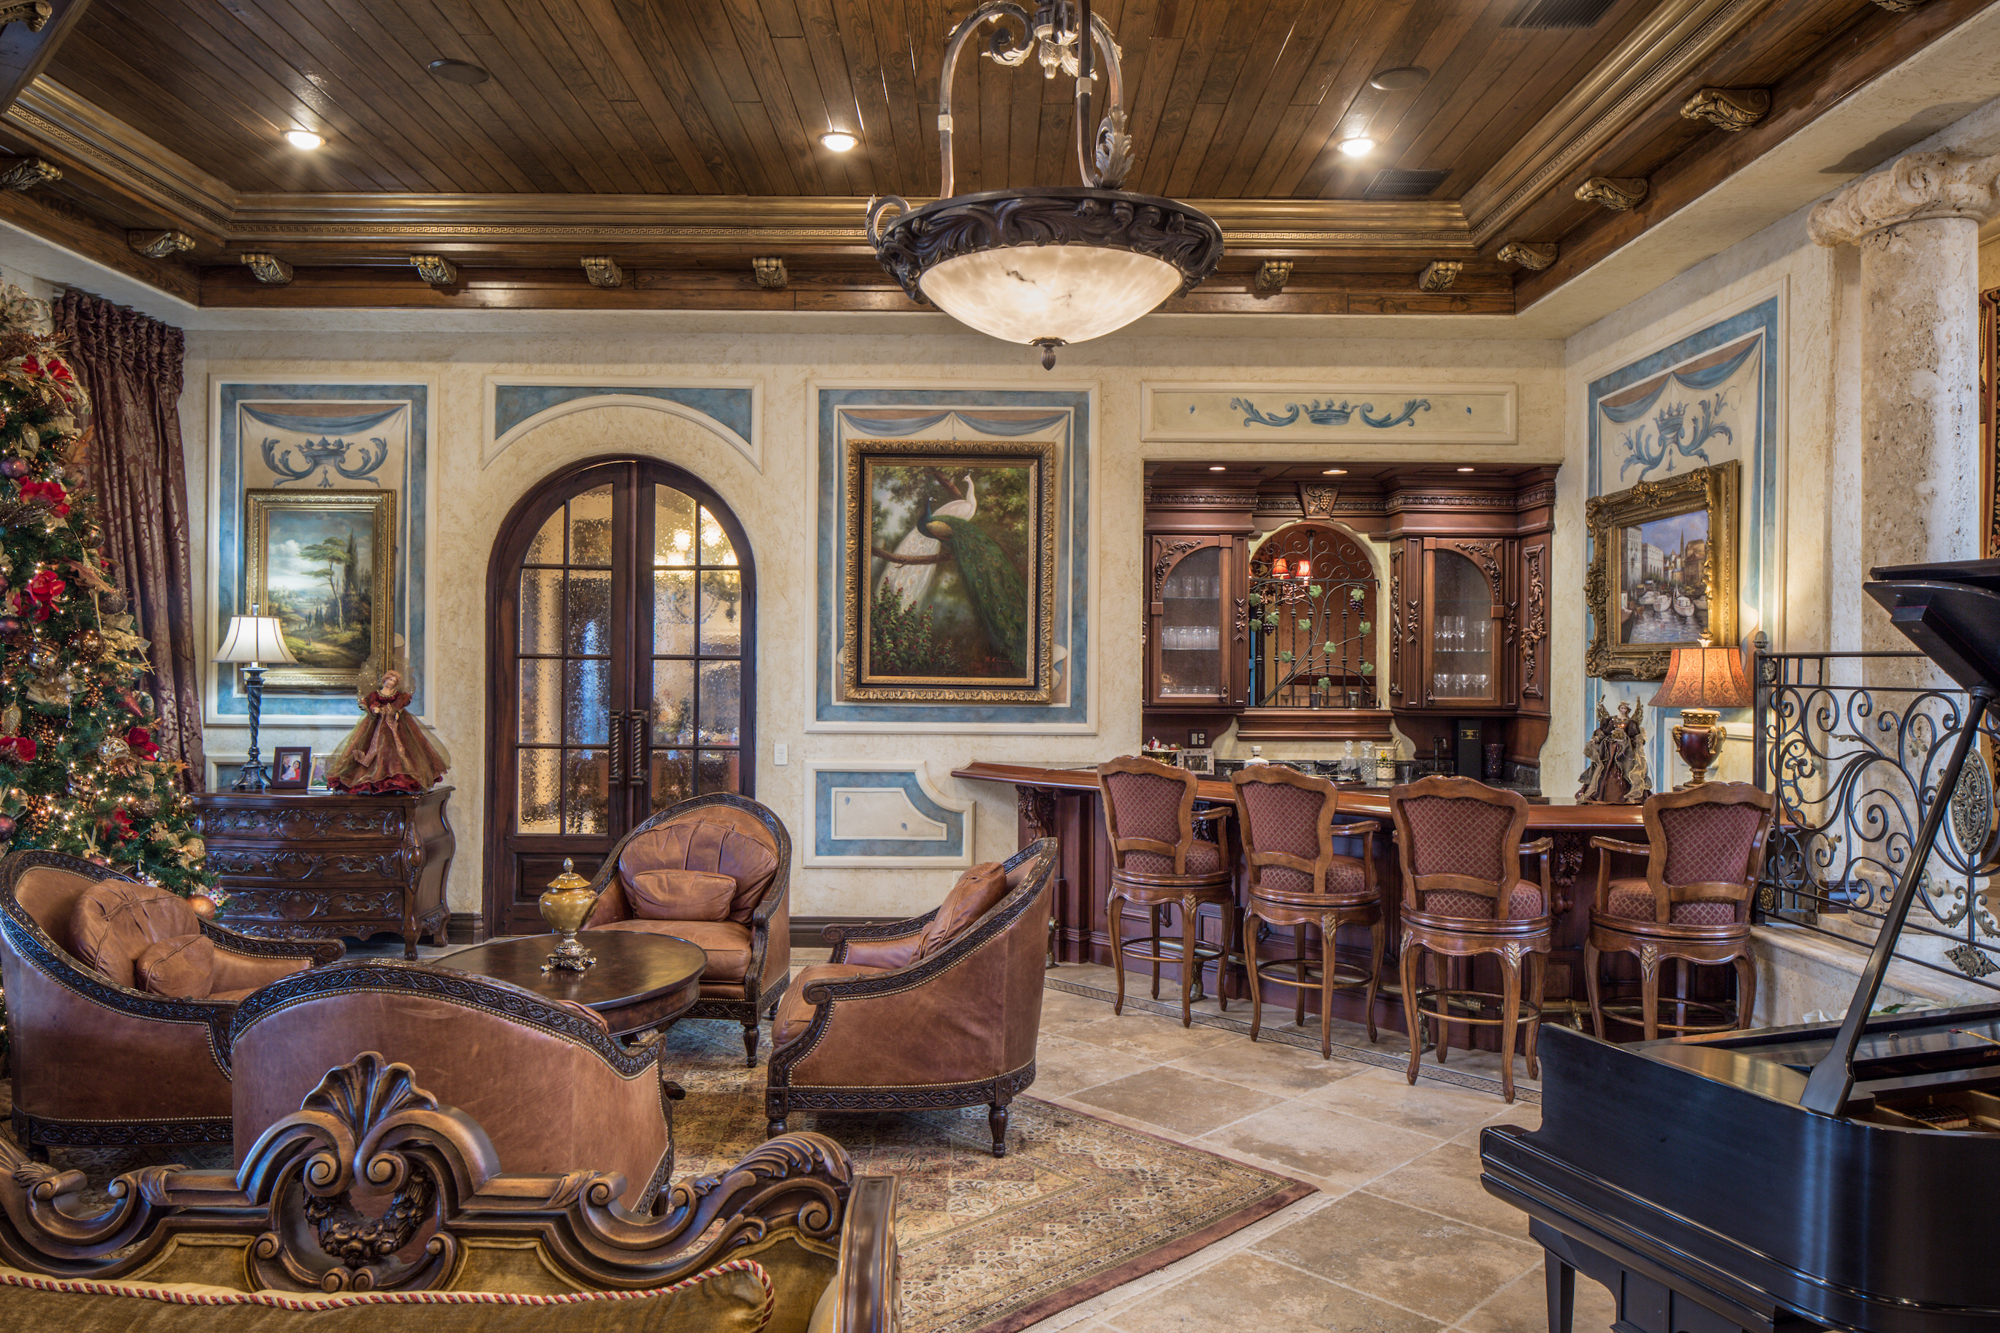  The French Renaissance-style interior of this Isleworth home gives it a warm feel. (Courtesy Concierge Auctions)